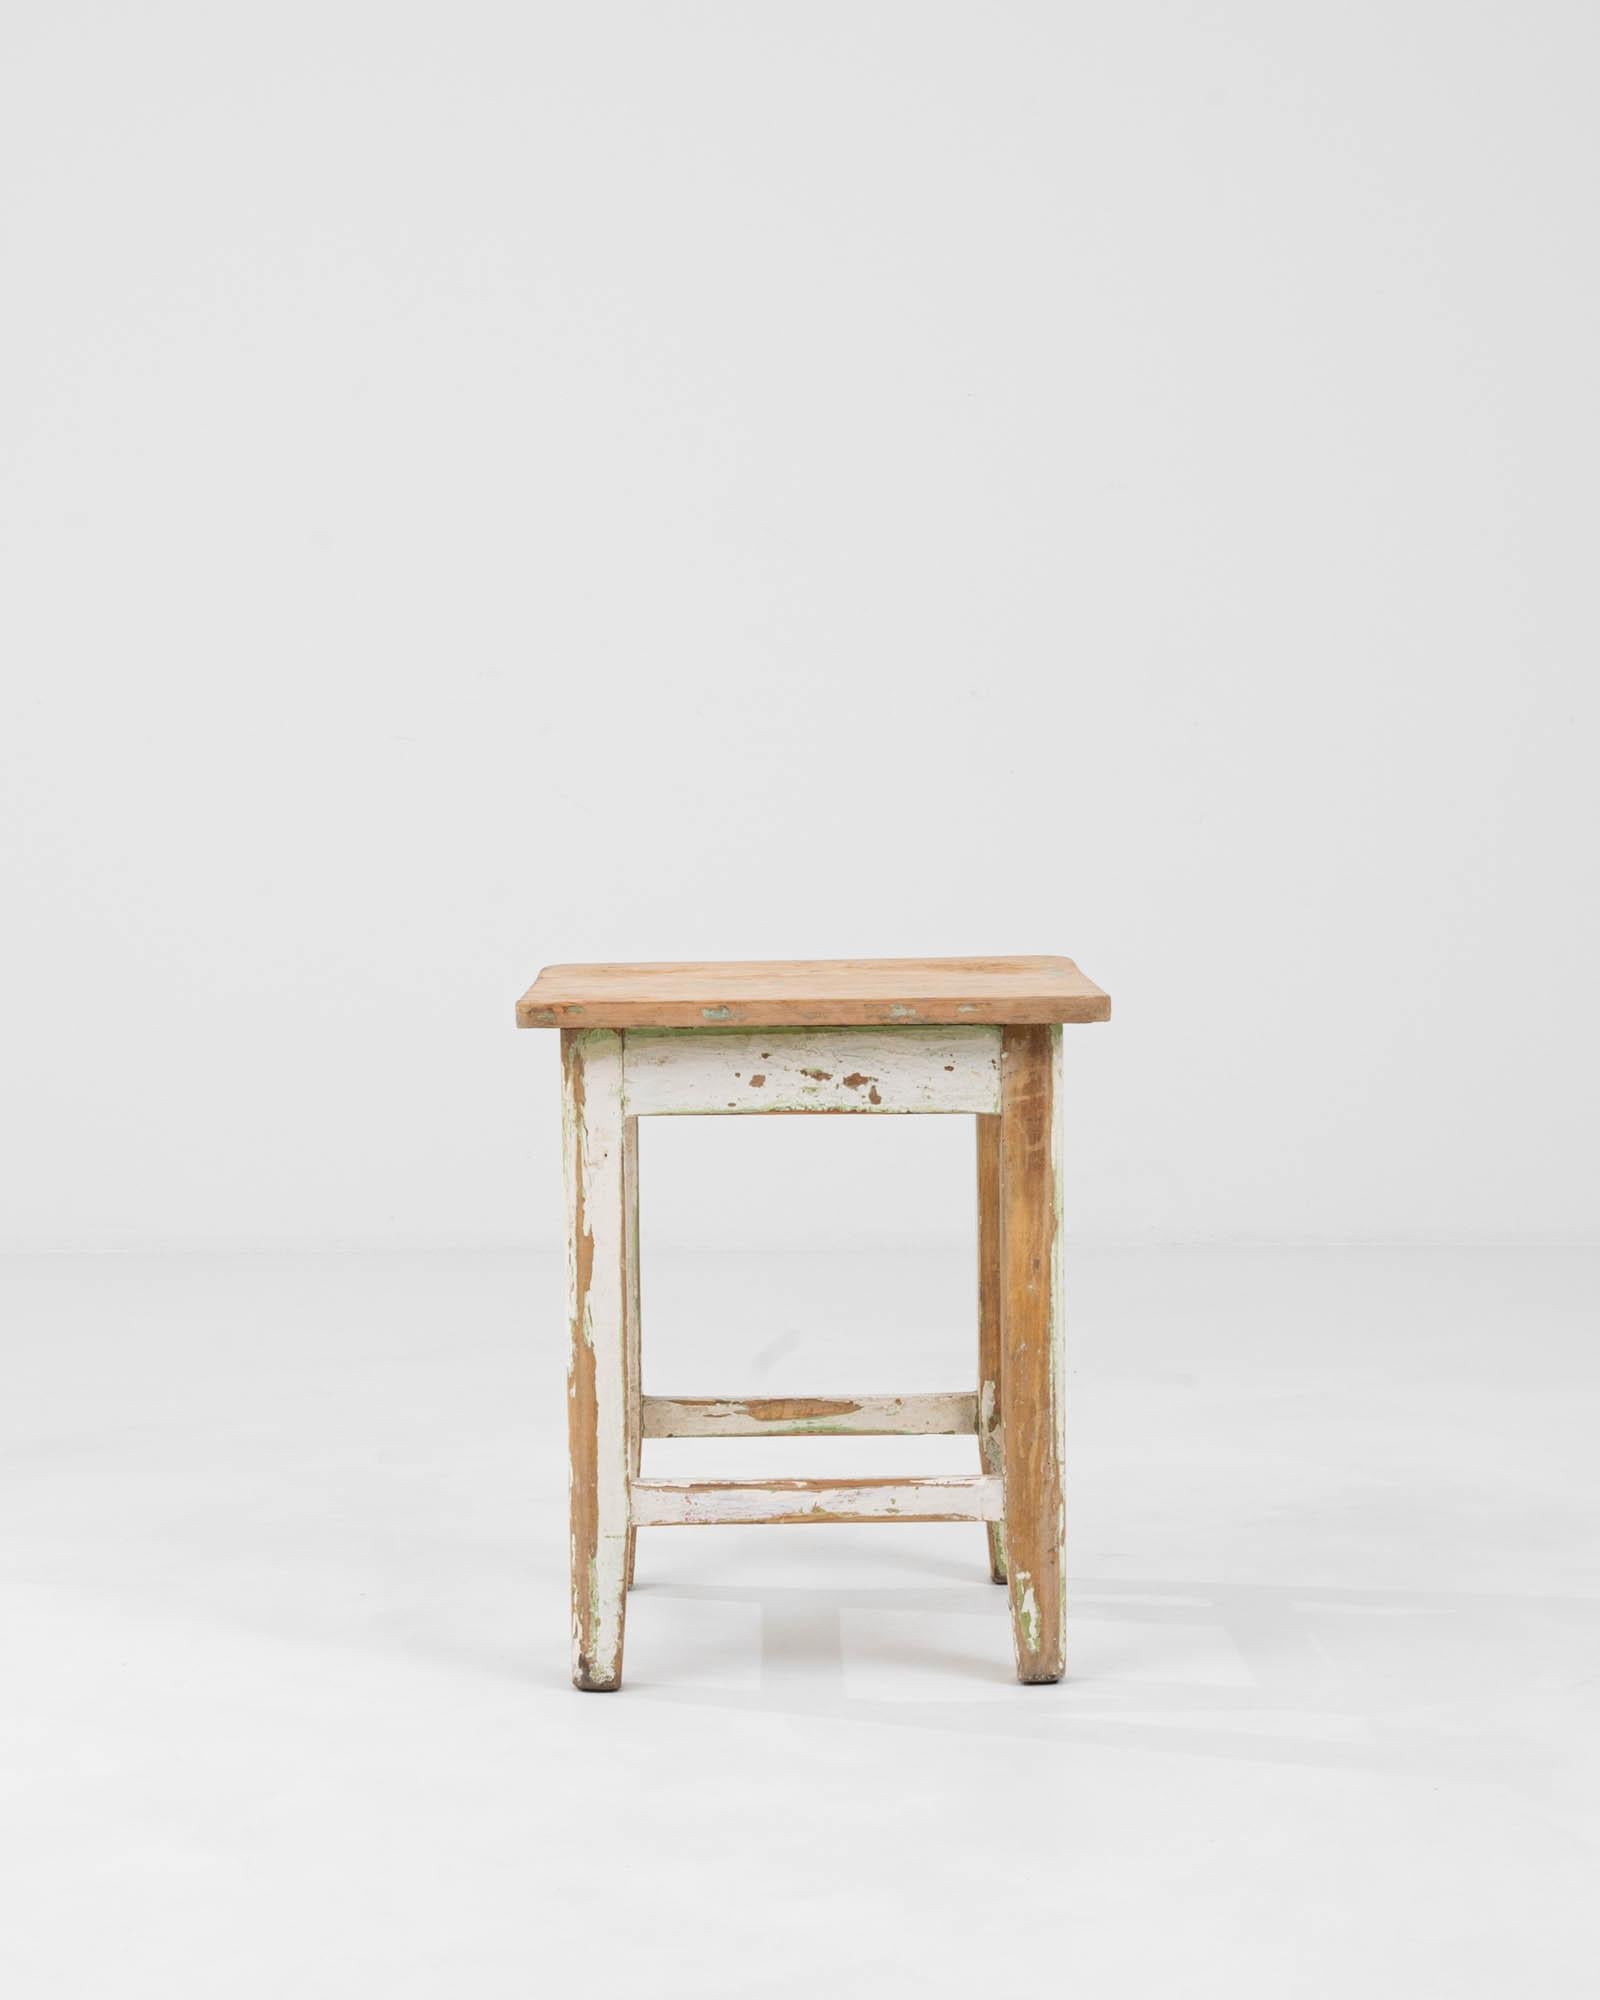 Embrace the essence of rustic charm with this Early 20th Century Central European wood patinated stool. Its storied life is evident in the layers of paint that suggest years of use, each mark and scratch a narrative of its past. Crafted with